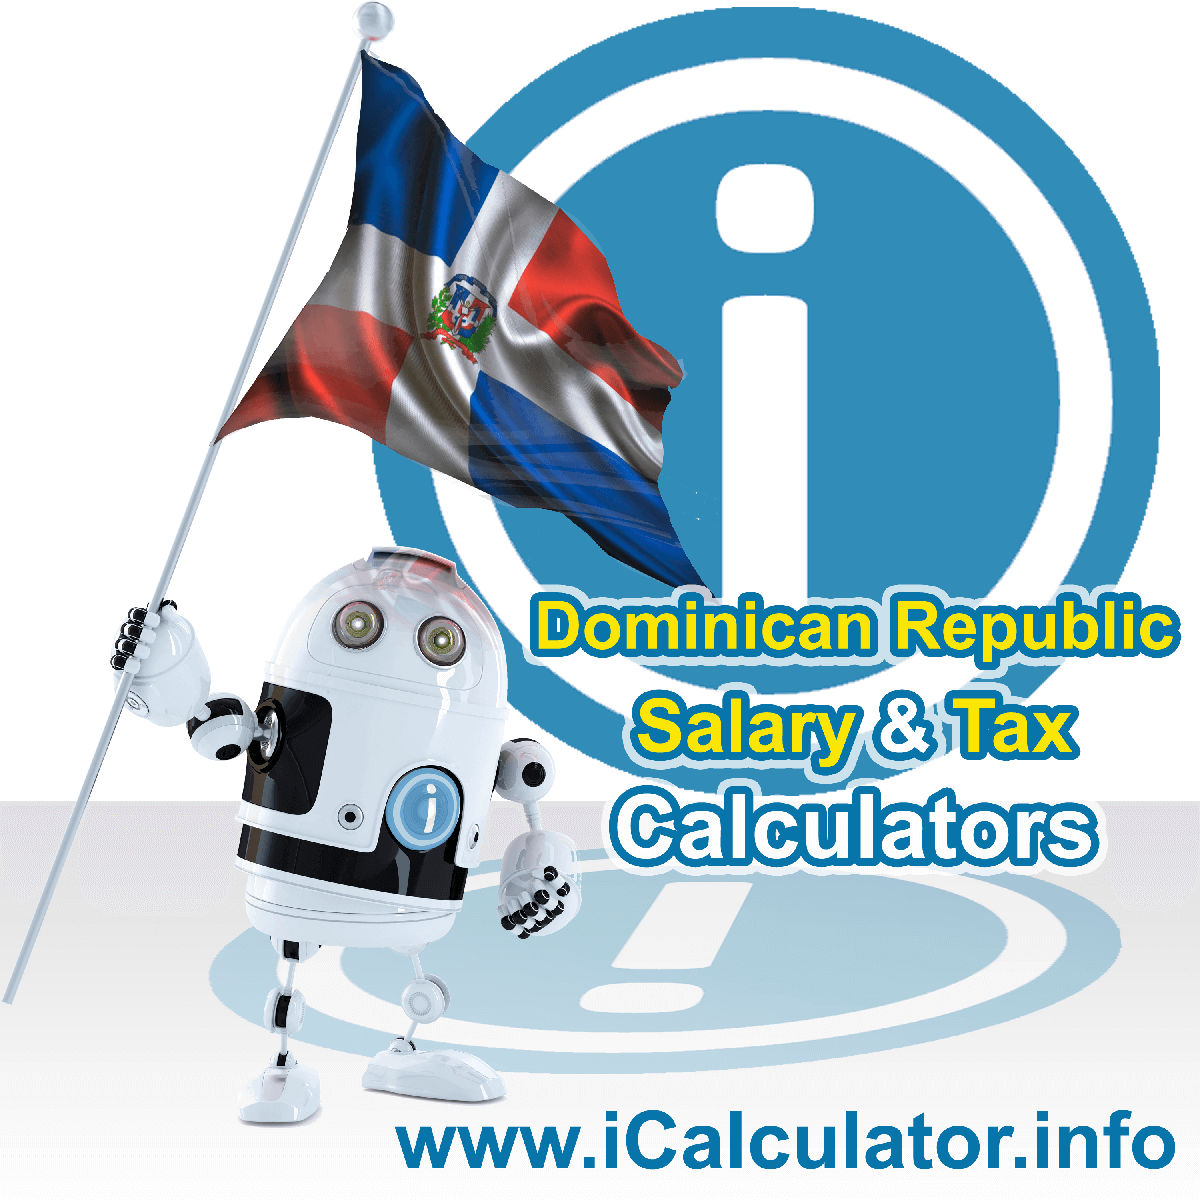 Dominican Republic Wage Calculator. This image shows the Dominican Republic flag and information relating to the tax formula for the Dominican Republic Tax Calculator